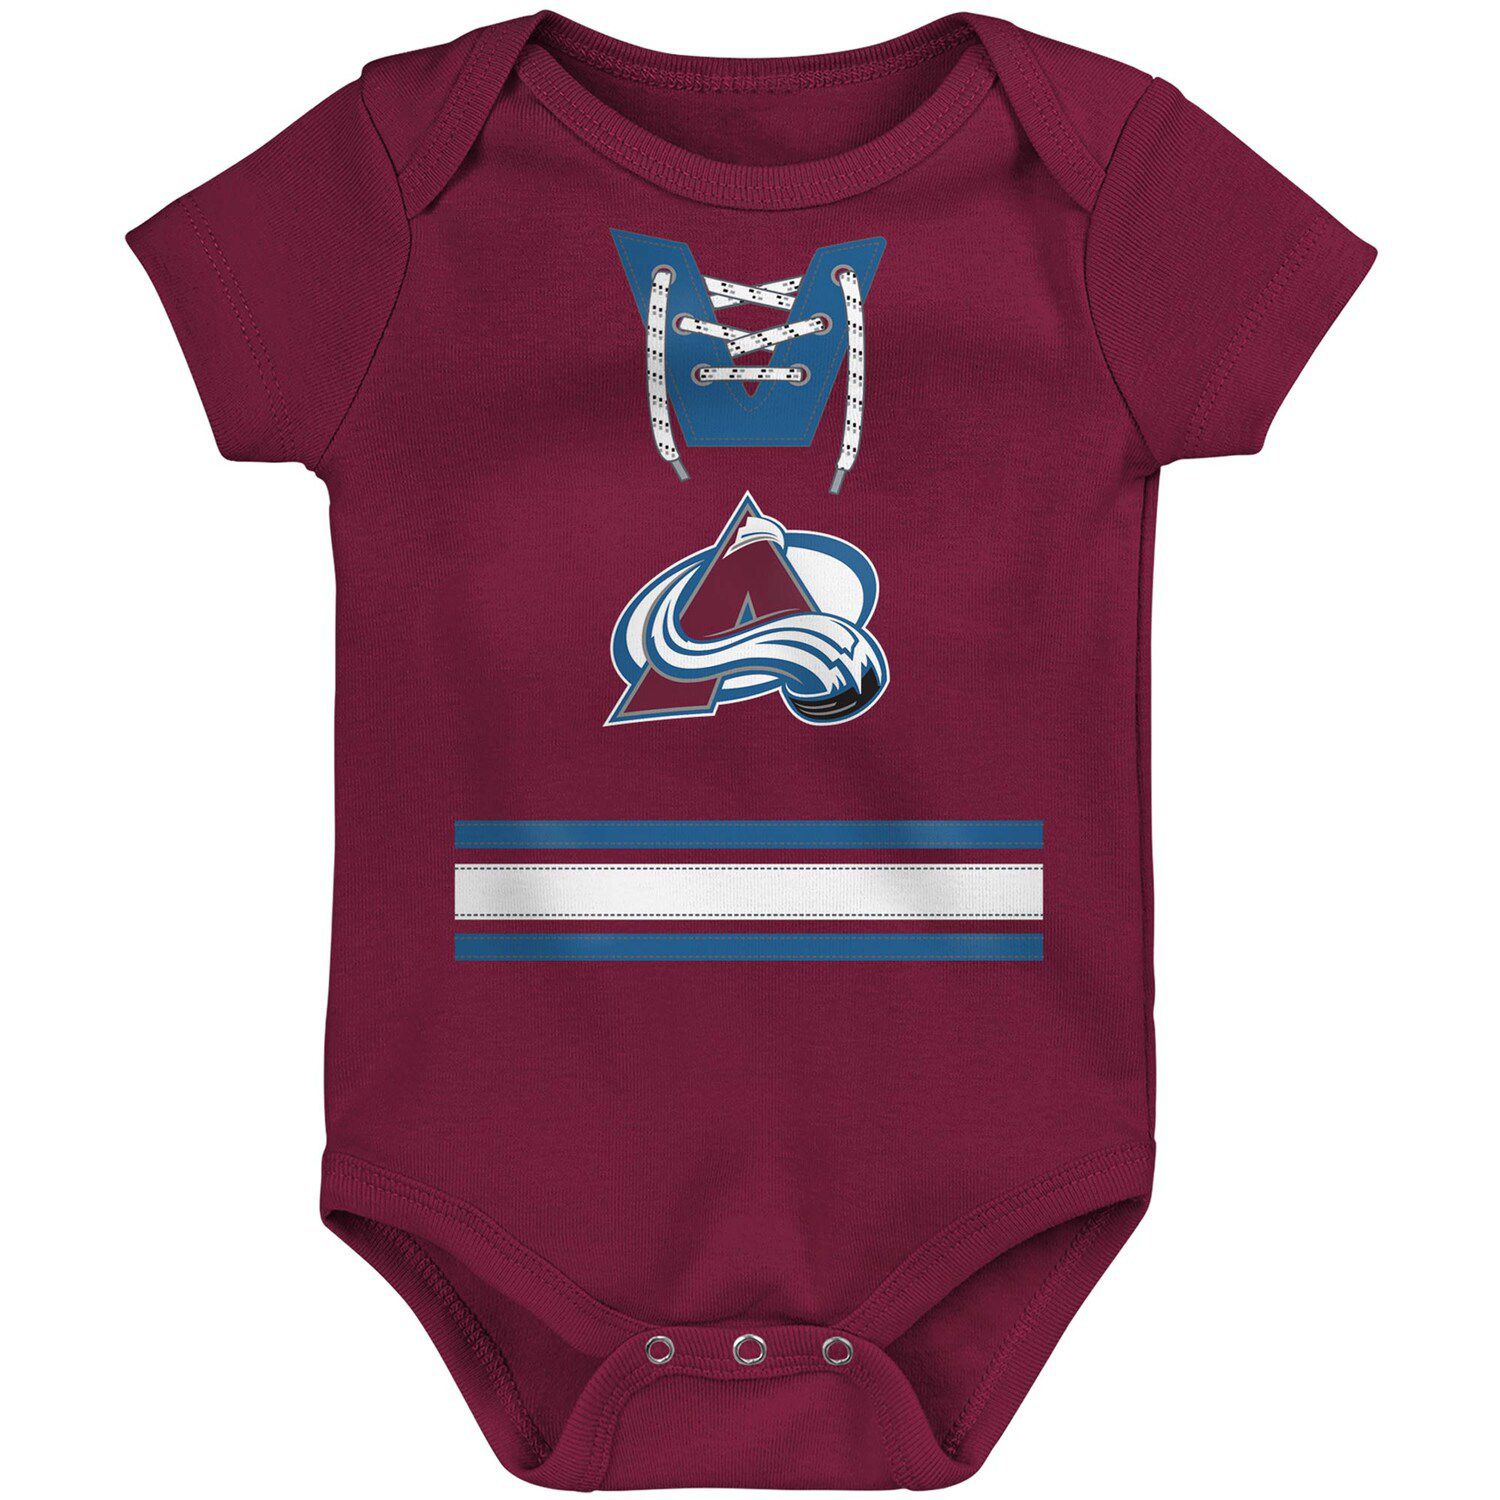 Avalanche baby jersey